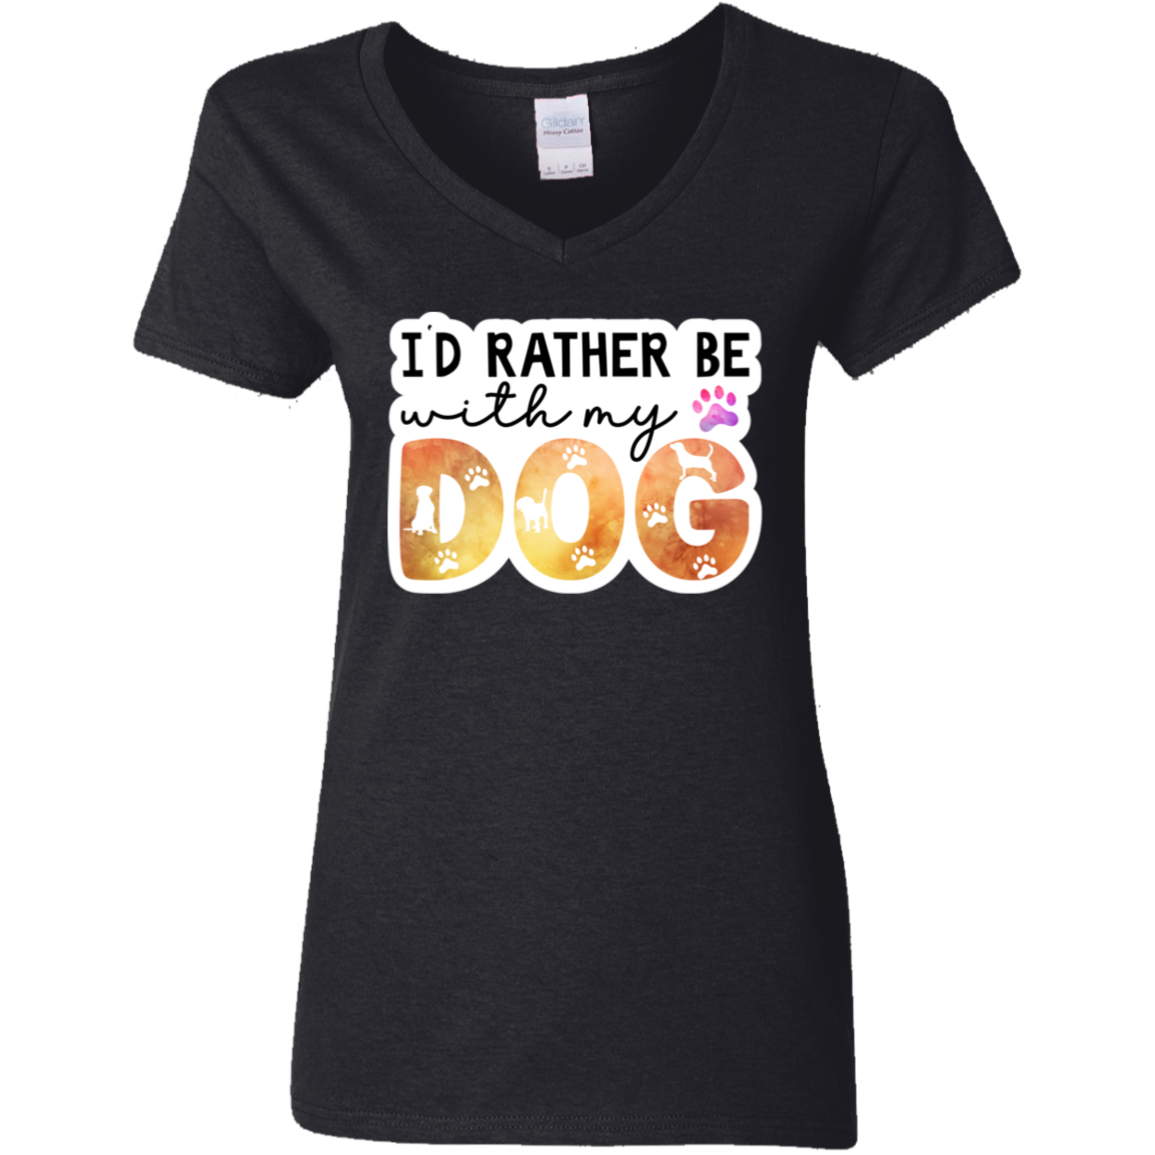 I'd Rather Be With My Dog Watercolor Ladies' V-Neck T-Shirt